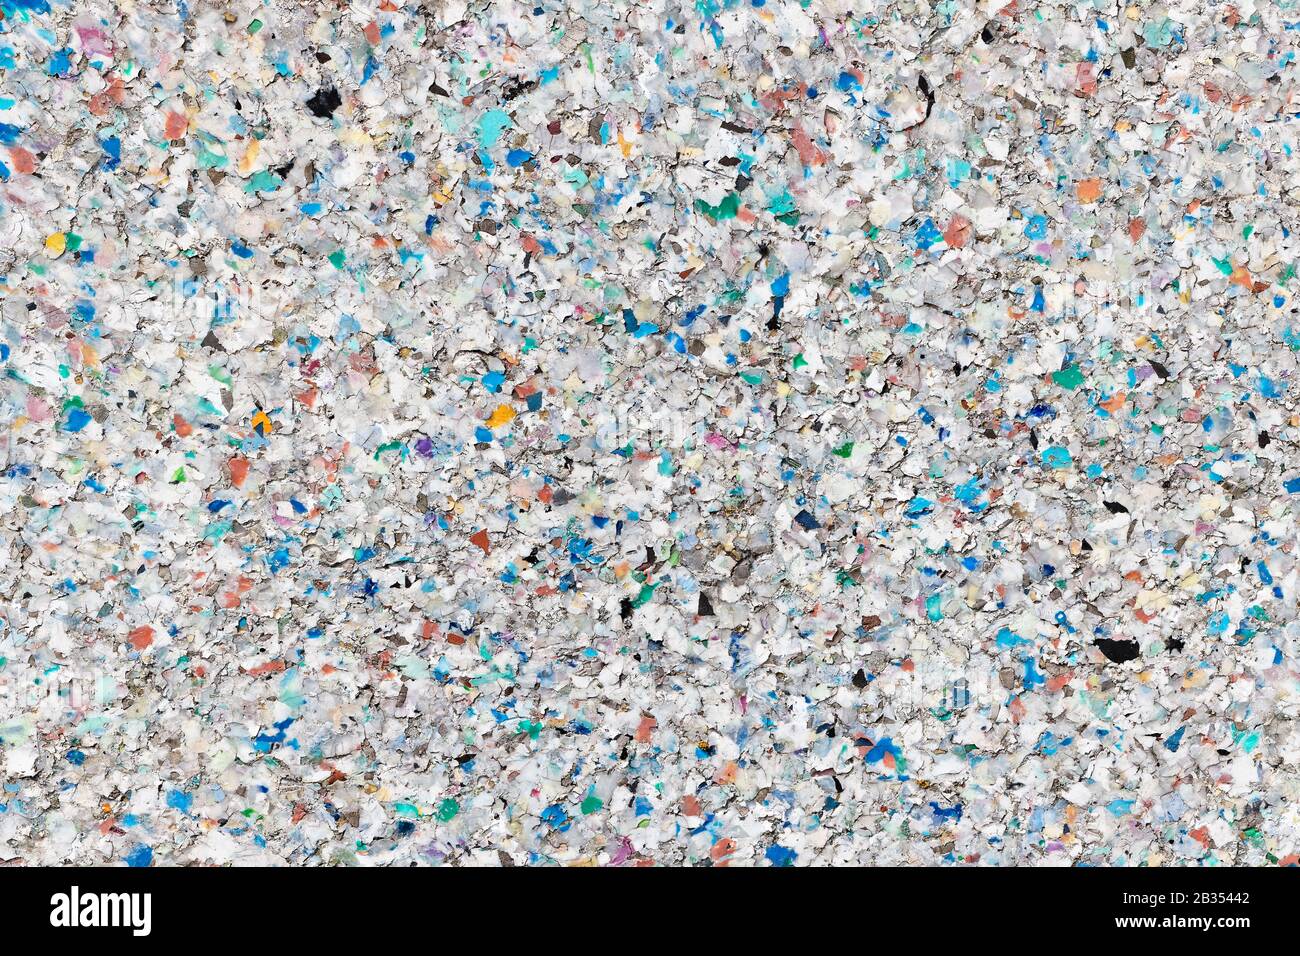 How can we improve the quality of recycled plastic?  Veolia, ecological  transformation: water management, energy and waste recycling